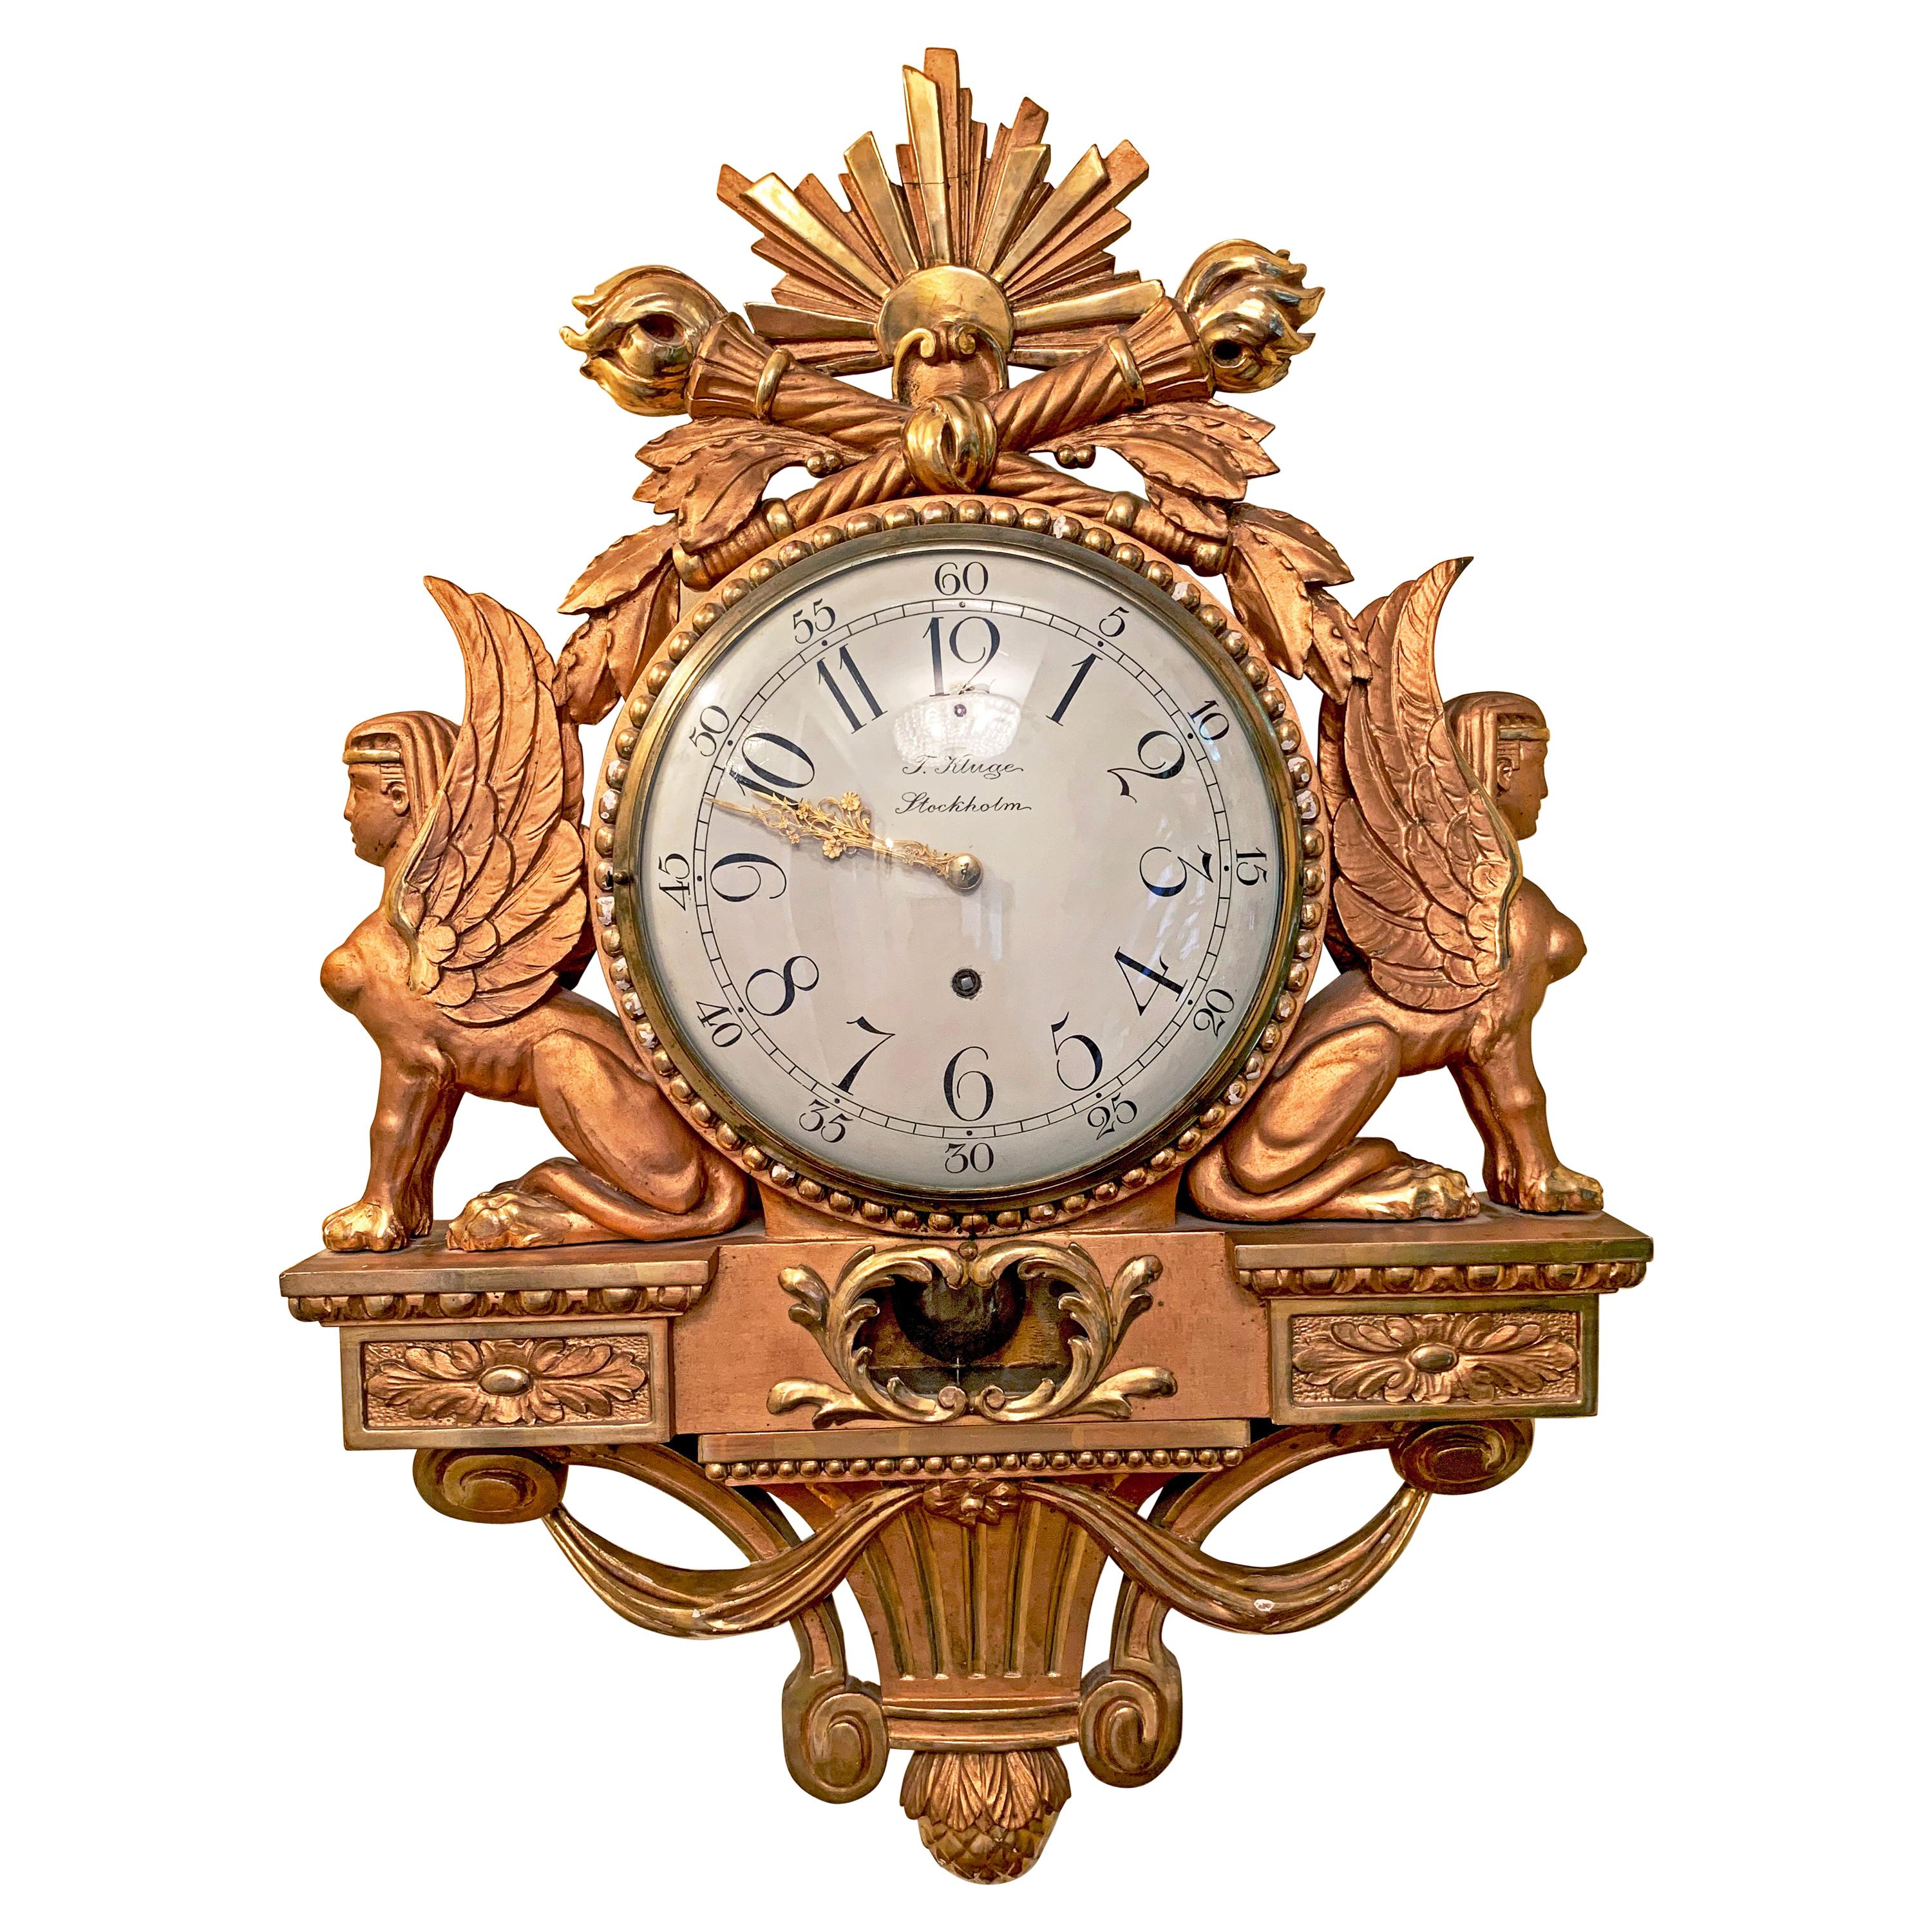 19th Century Empire Clock Gold T Kluge Stockholm with Sphinxes on Each Side For Sale